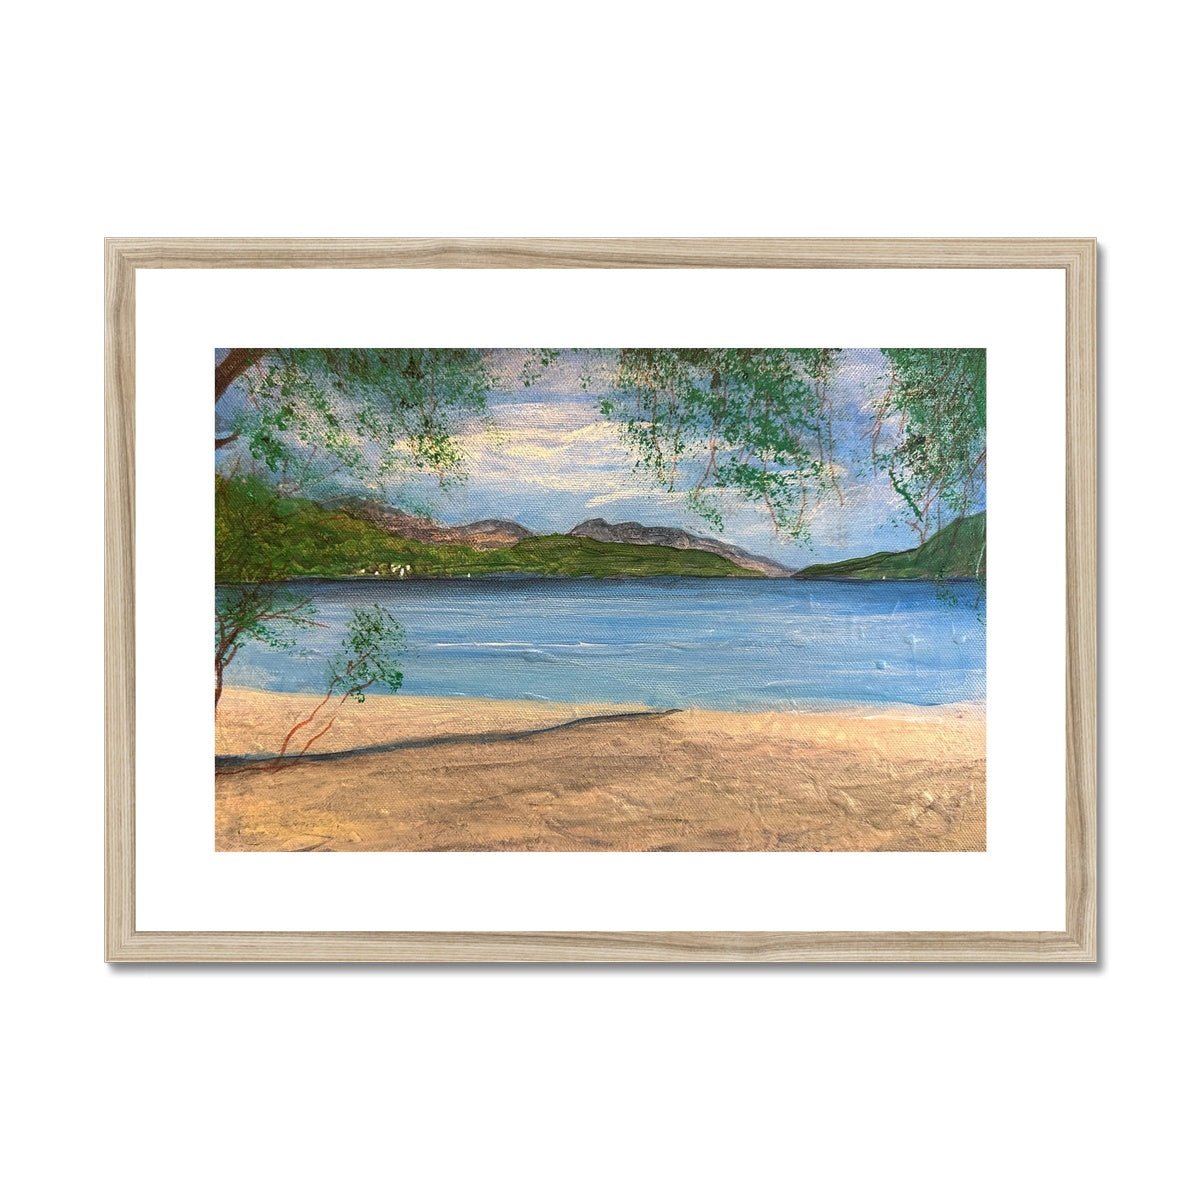 Firkin Point Loch Lomond Painting | Framed & Mounted Prints From Scotland-Framed & Mounted Prints-Scottish Lochs & Mountains Art Gallery-A2 Landscape-Natural Frame-Paintings, Prints, Homeware, Art Gifts From Scotland By Scottish Artist Kevin Hunter